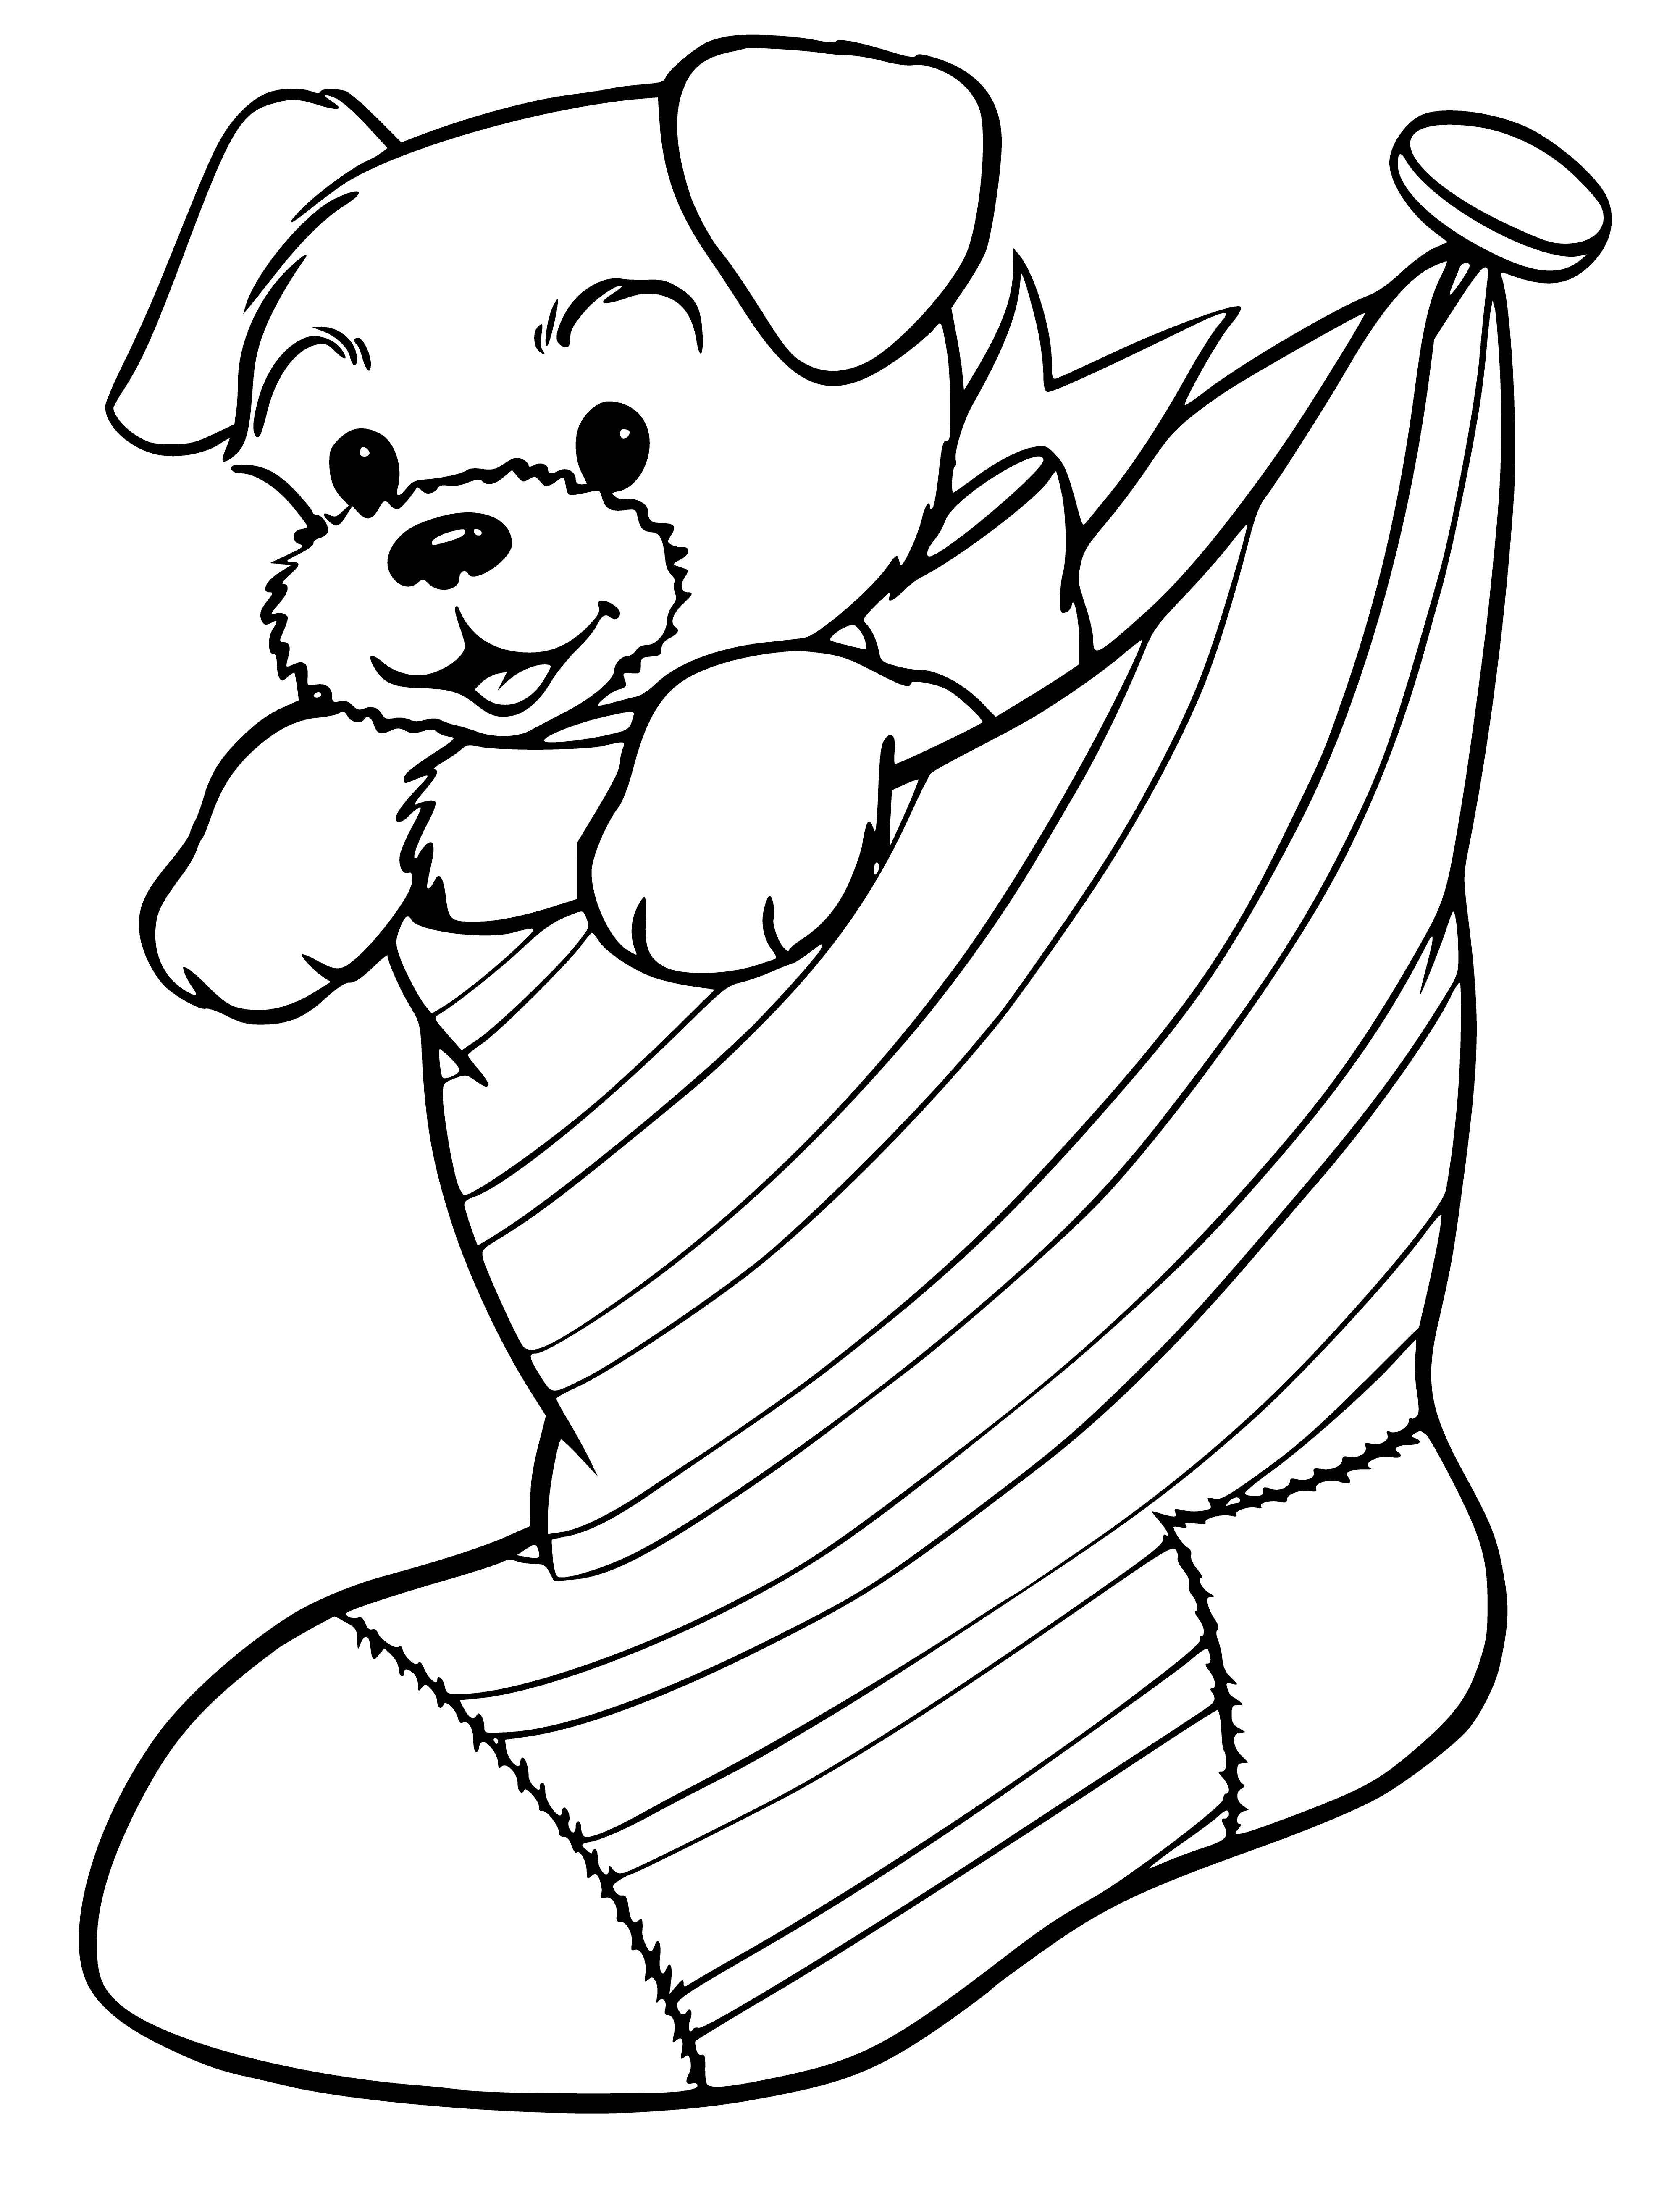 coloring page: Christmas socks with a cute black & white puppy wearing a Santa hat, on a green background with red & white stripes.